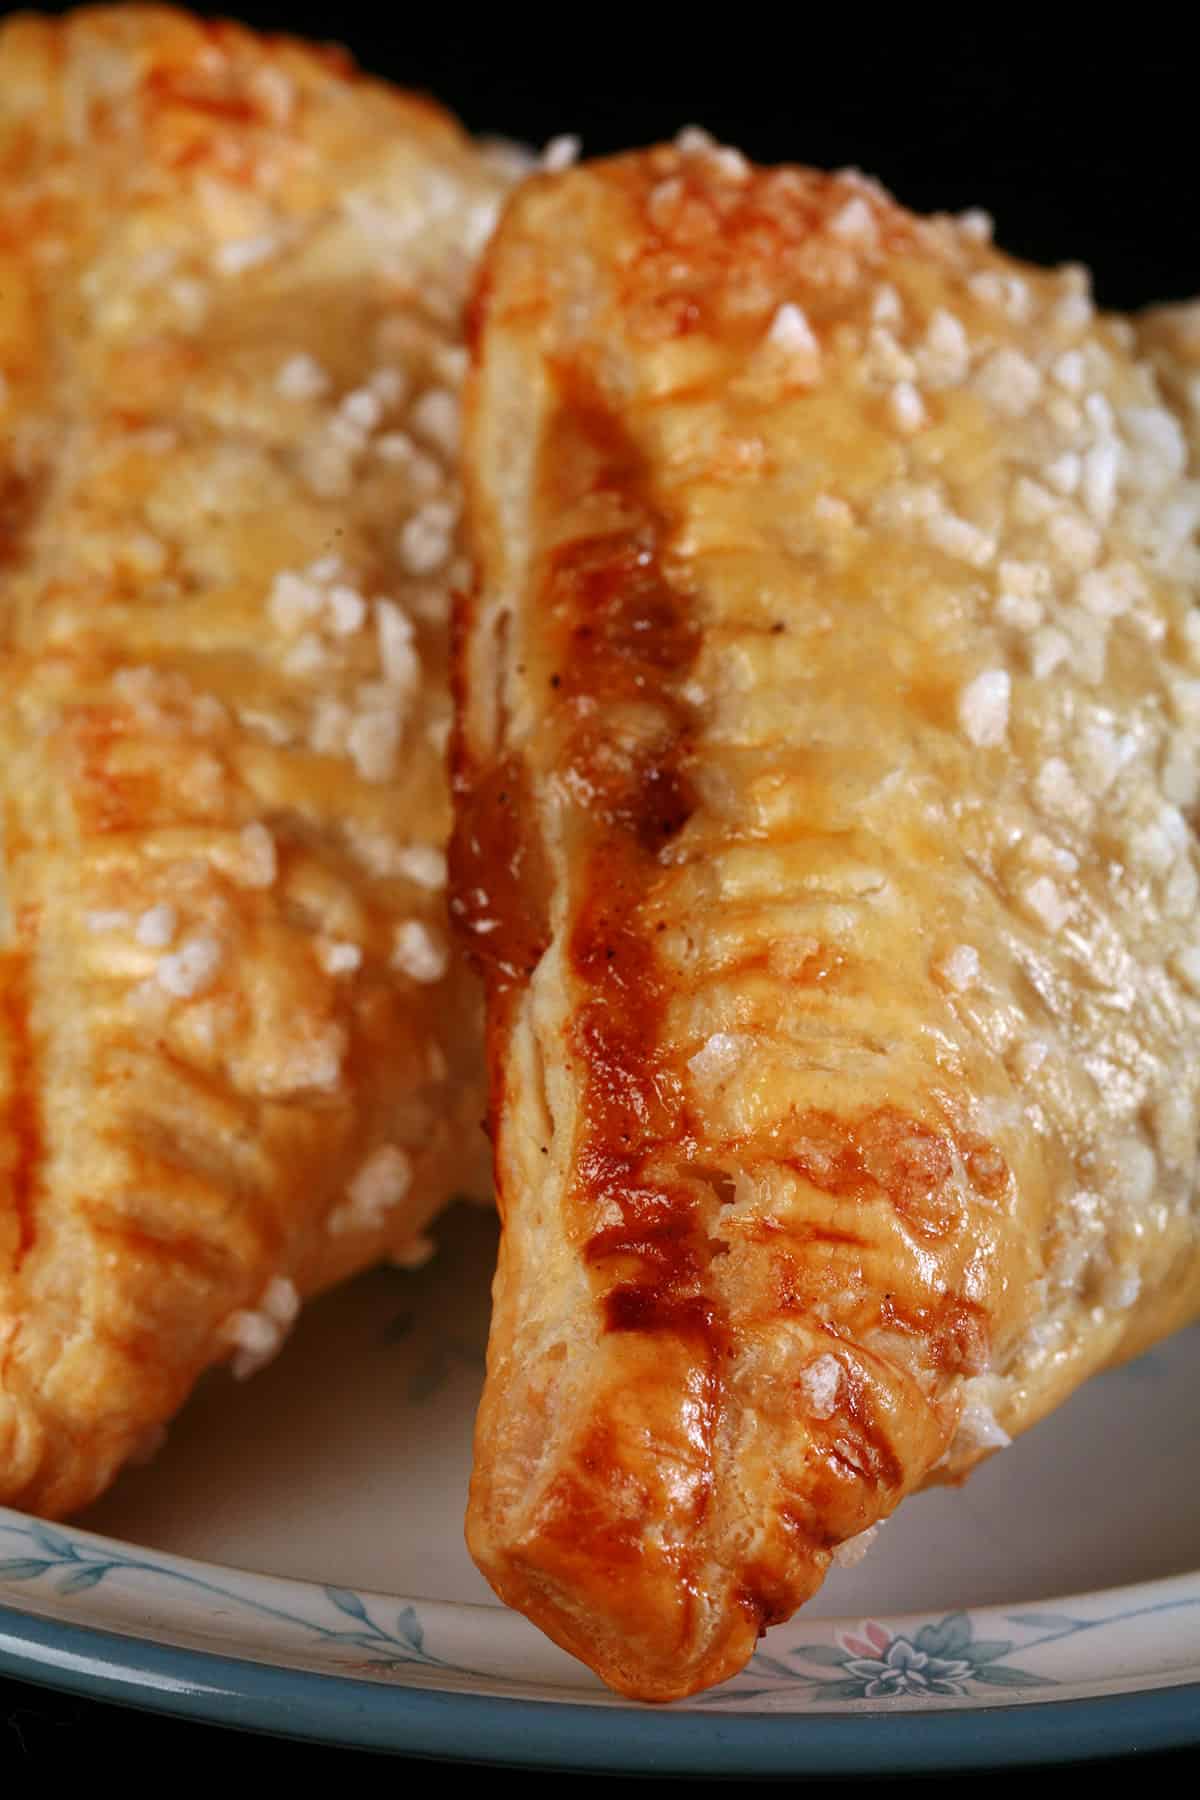 2 sugar crusted apple turnovers on a plate.